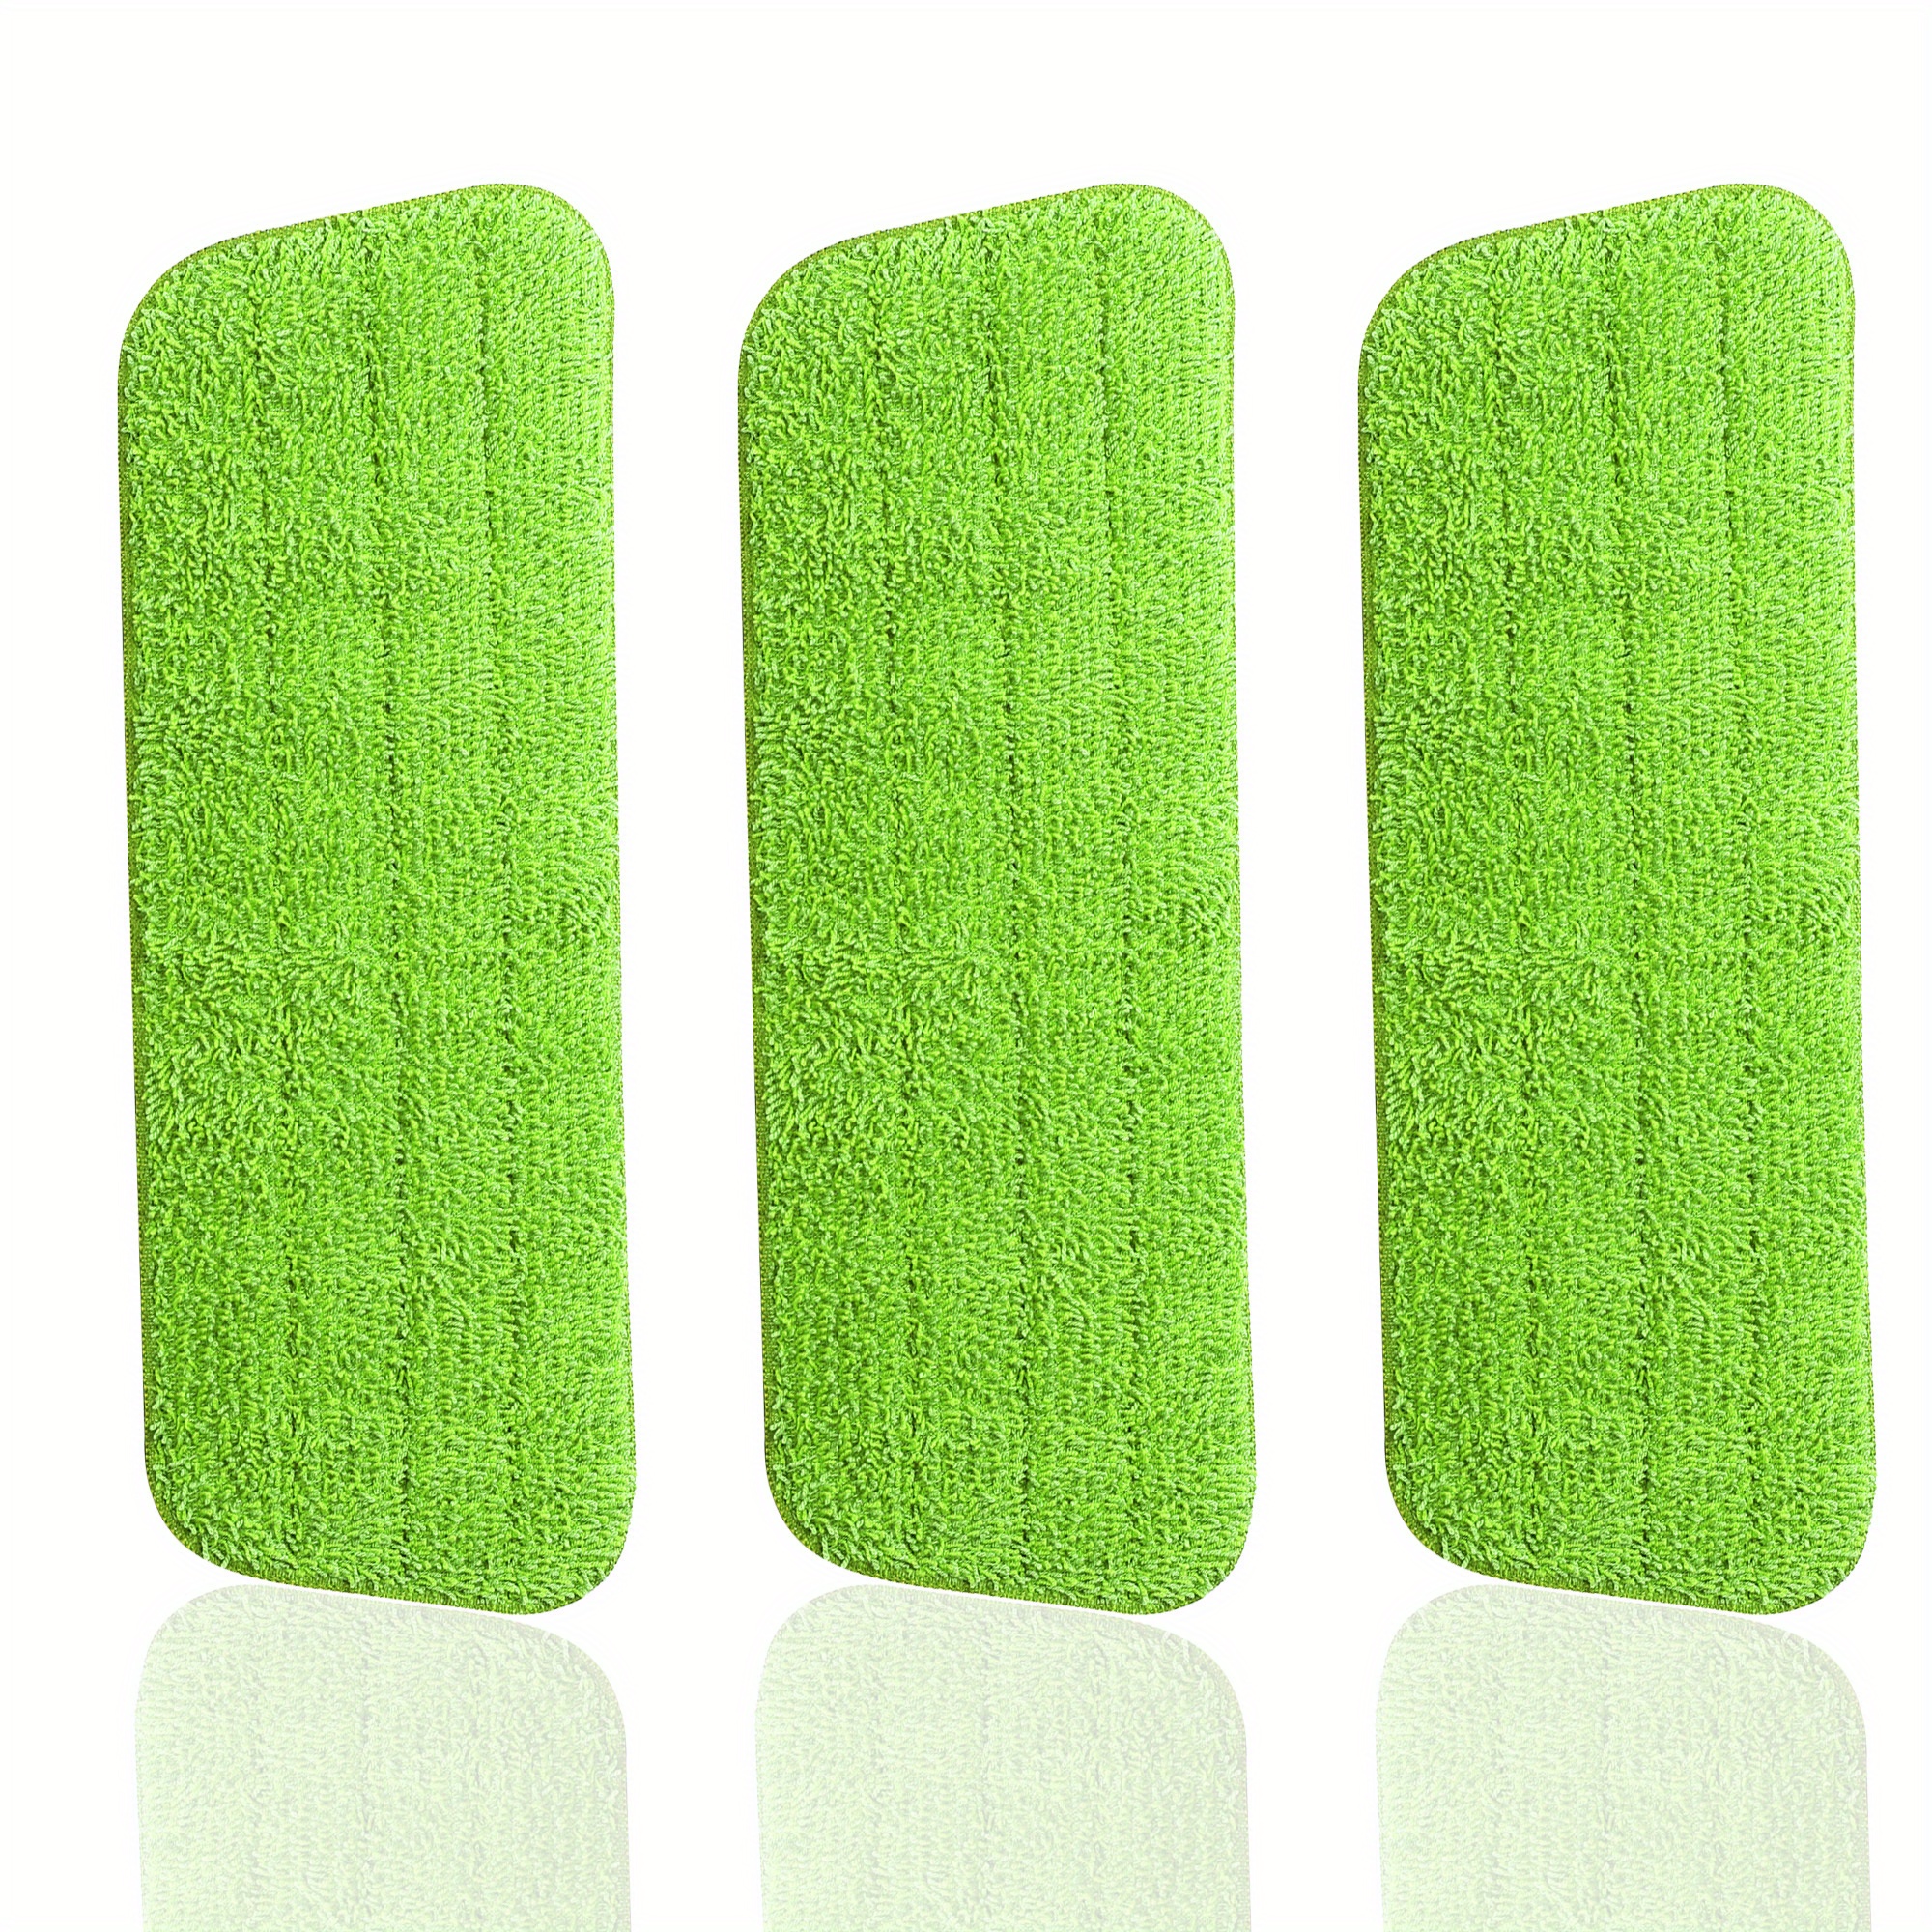 Reusable Replacement Mop Pads, Microfiber Washable Spray Mop